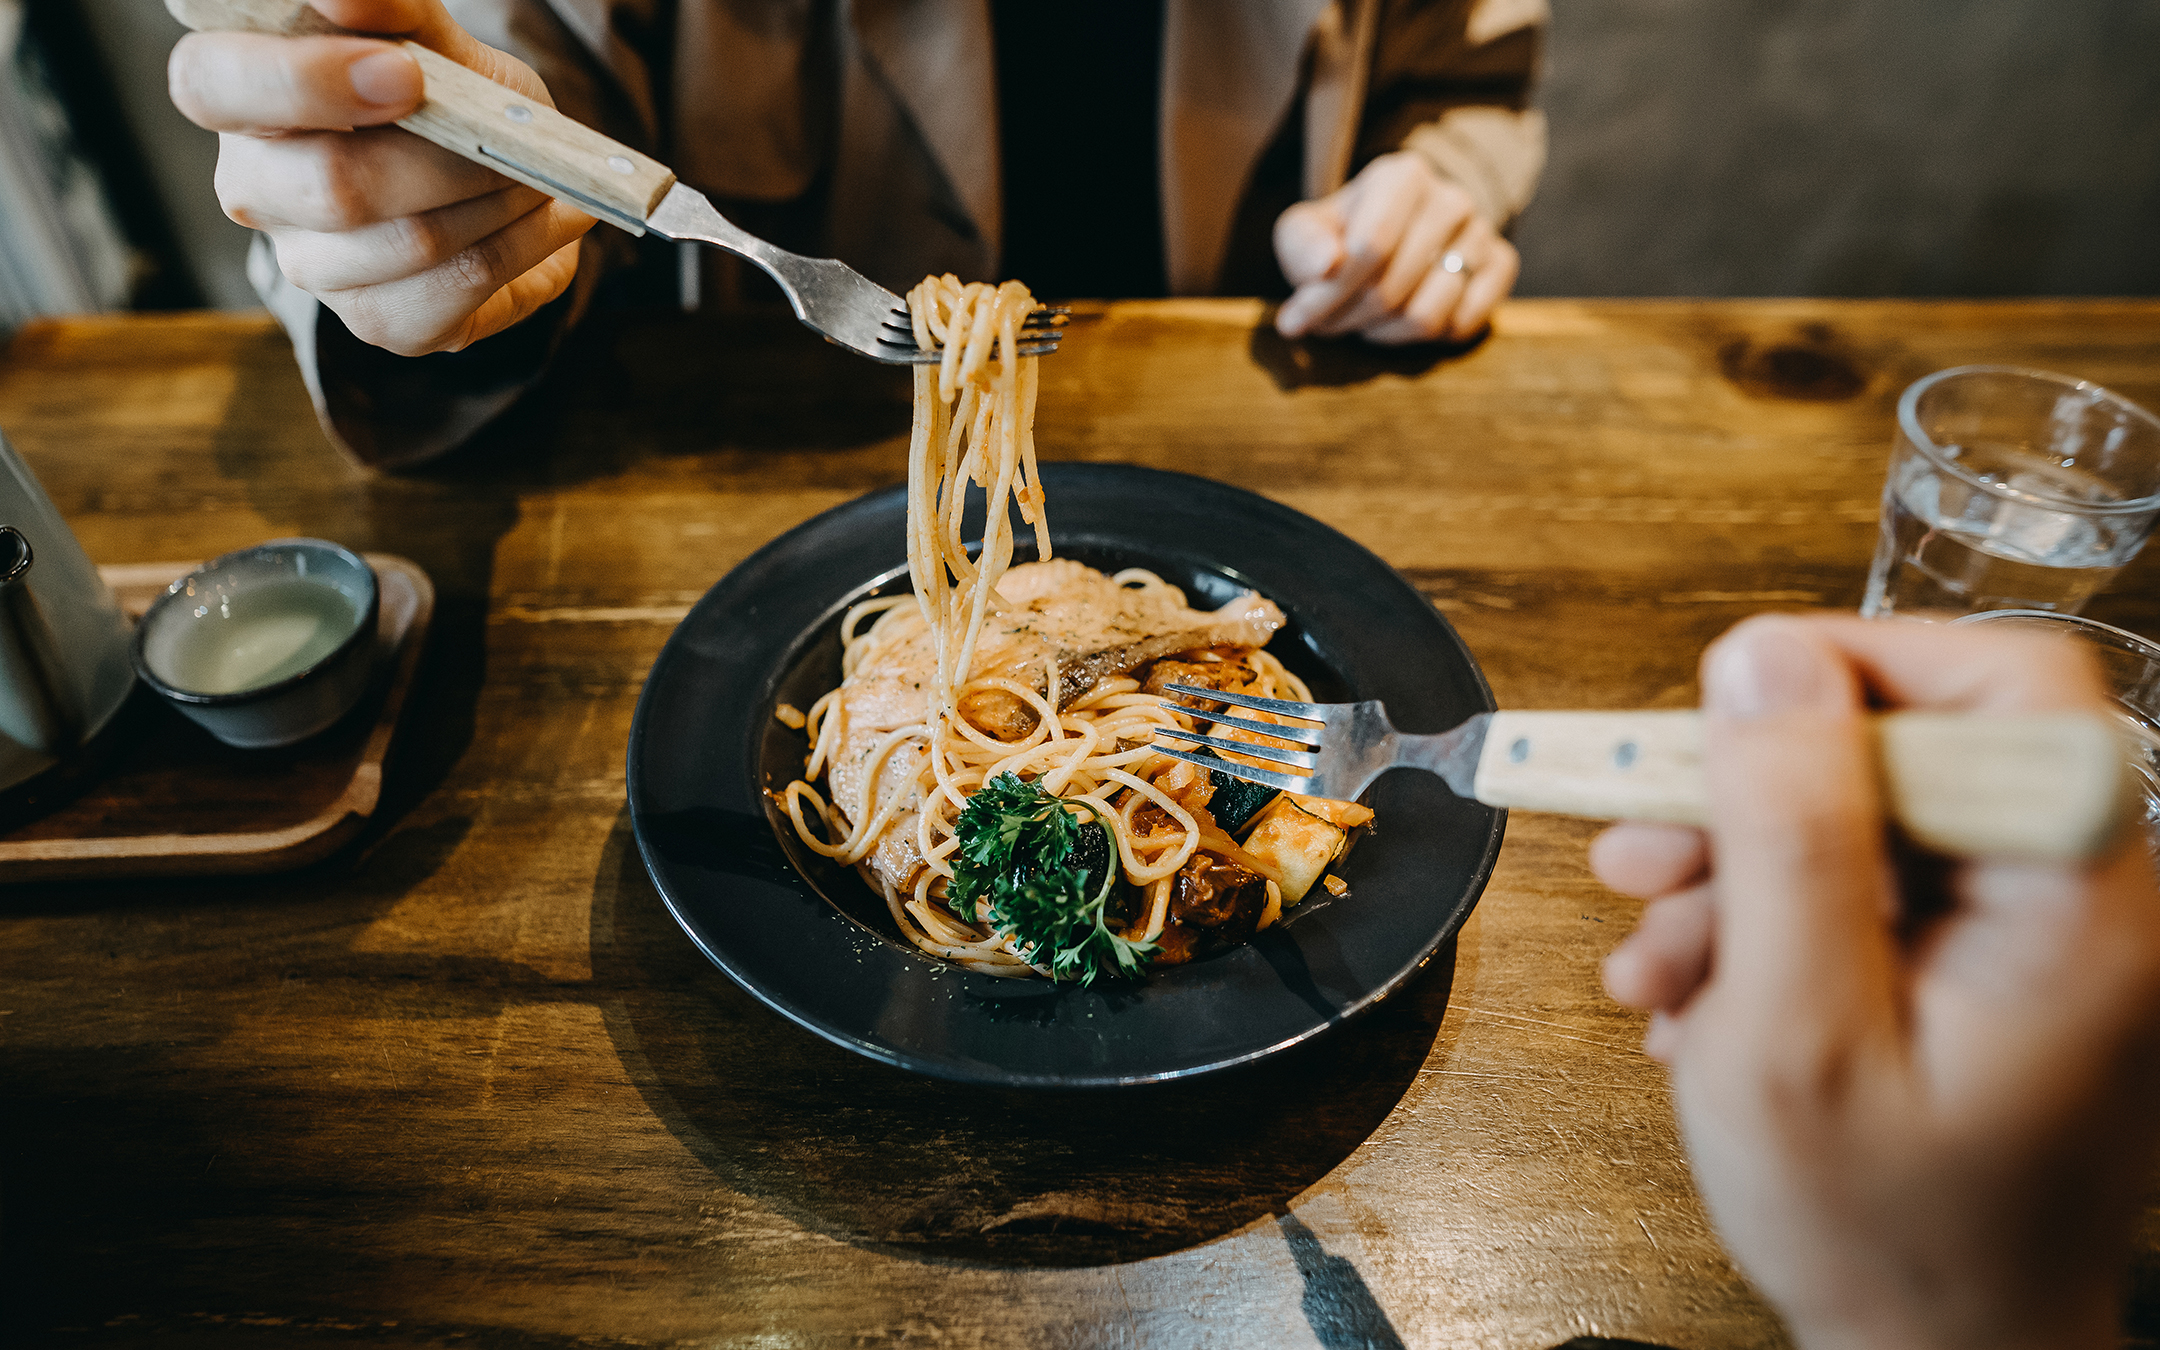 Hands of couple sharing and enjoying freshly made pasta in a restaurant